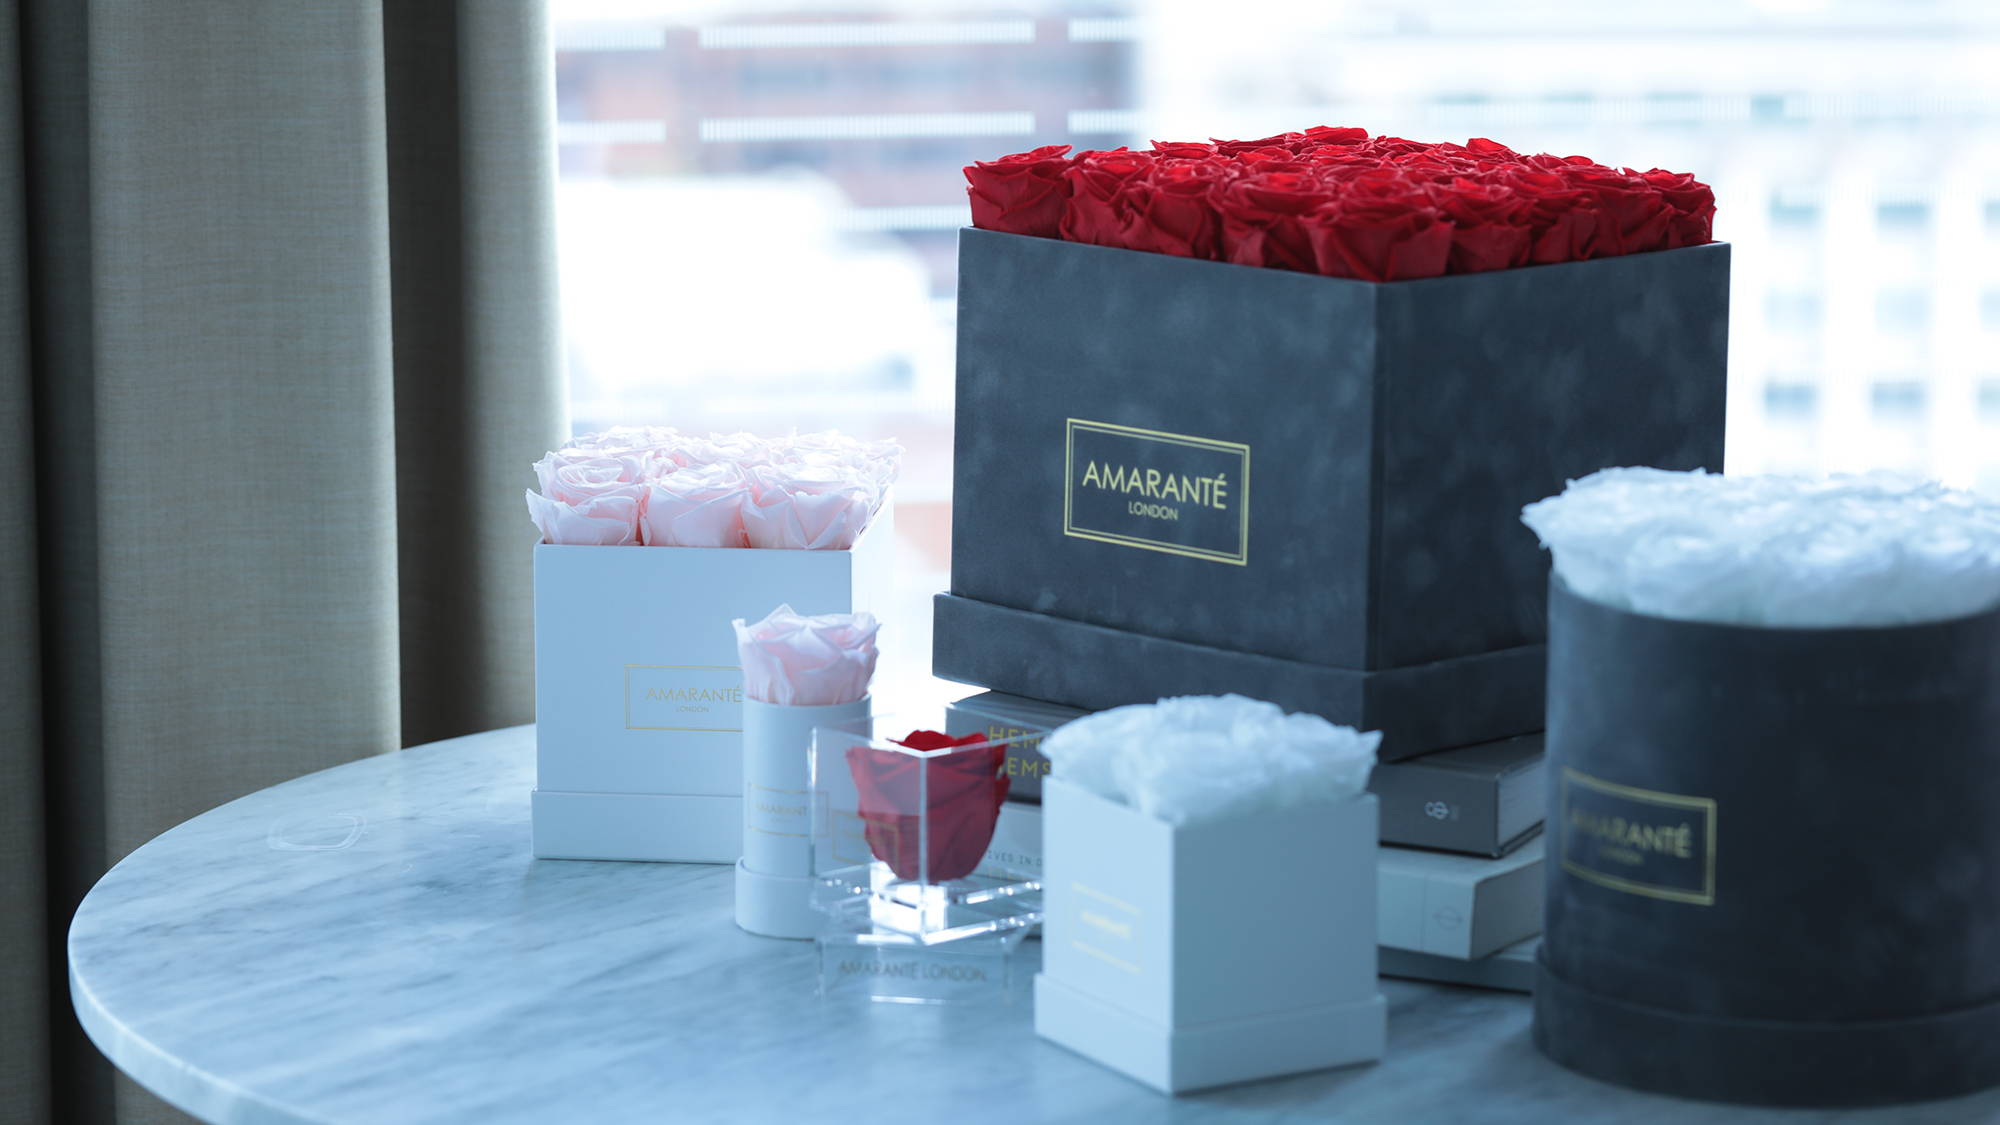 Infinity Roses in hatboxes of different sizes and shapes arranged on a table